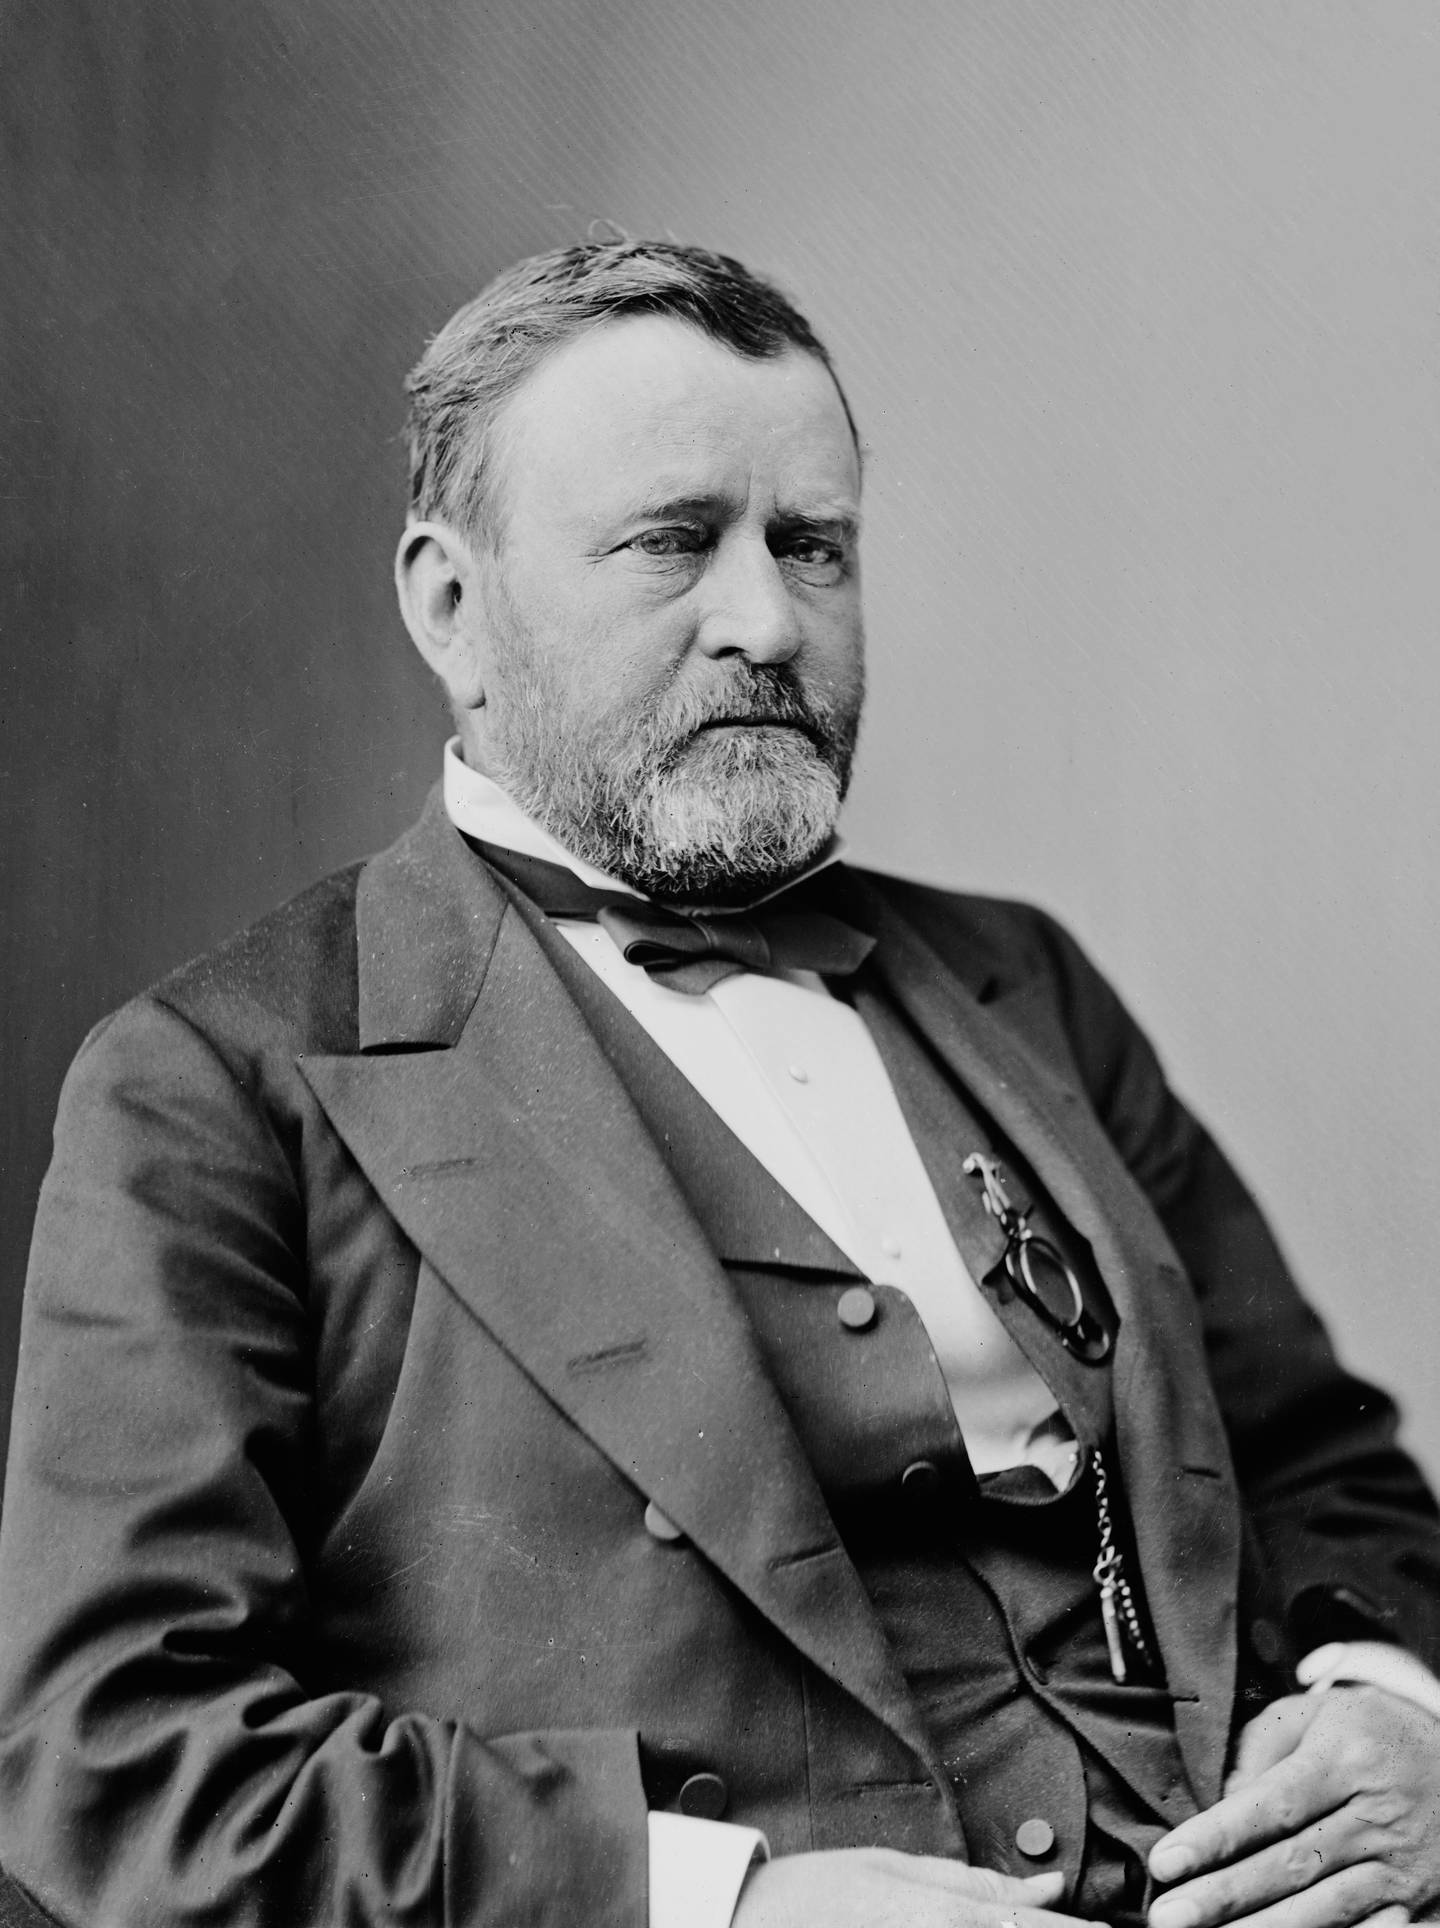 This image of Ulysses S. Grant is from the Brady-Handy photograph collection in the public domain care of the Library of Congress.